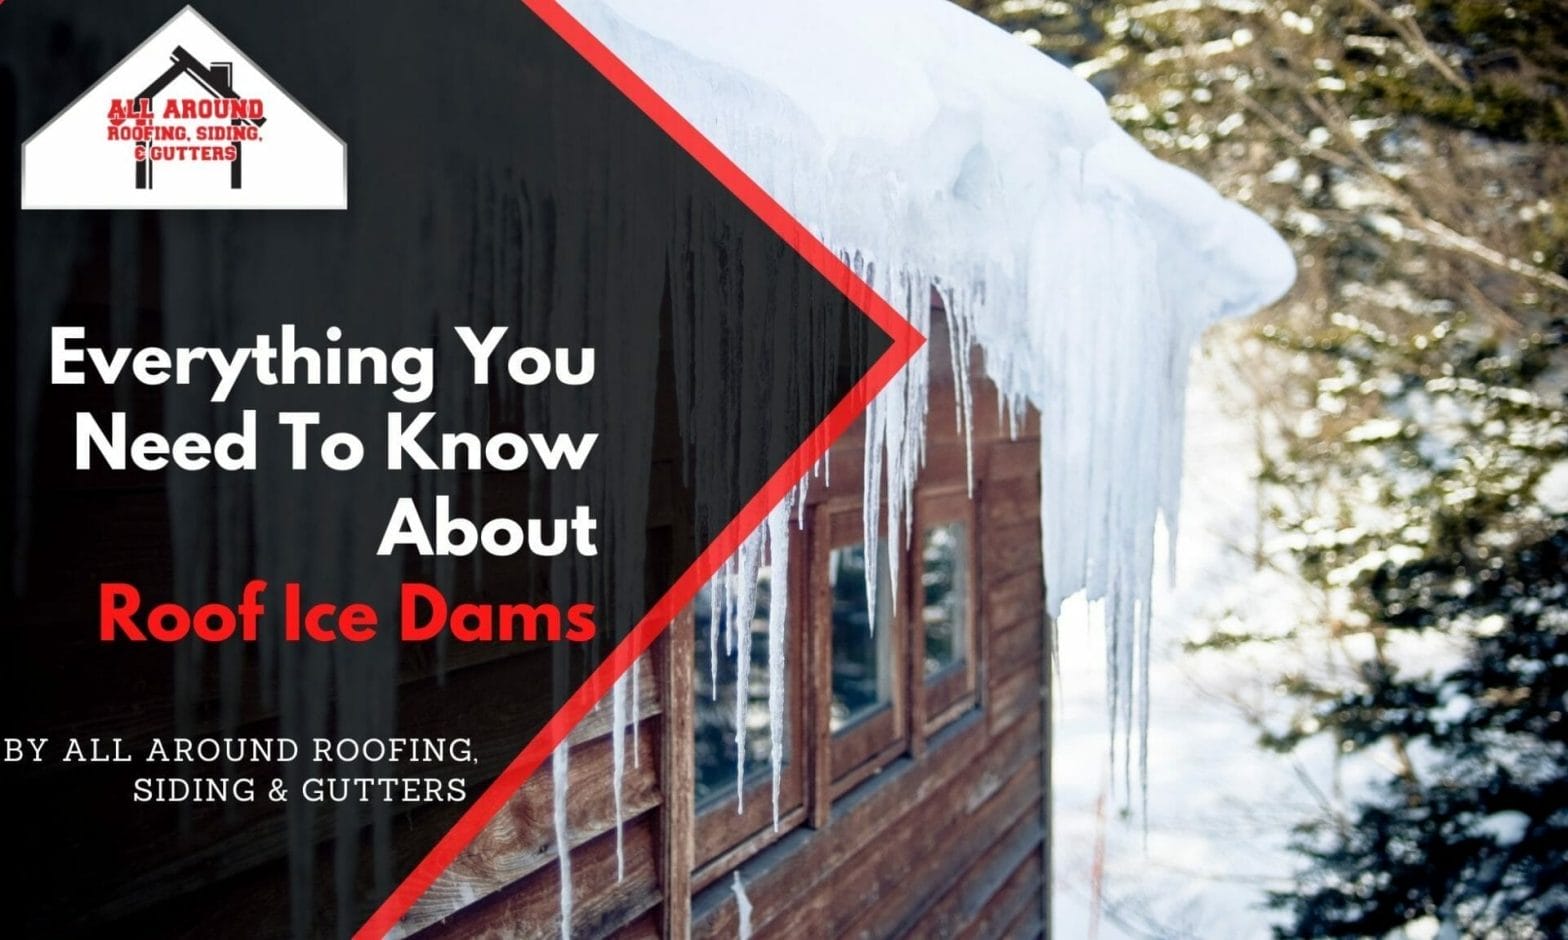 Everything You Need To Know About Roof Ice Dams